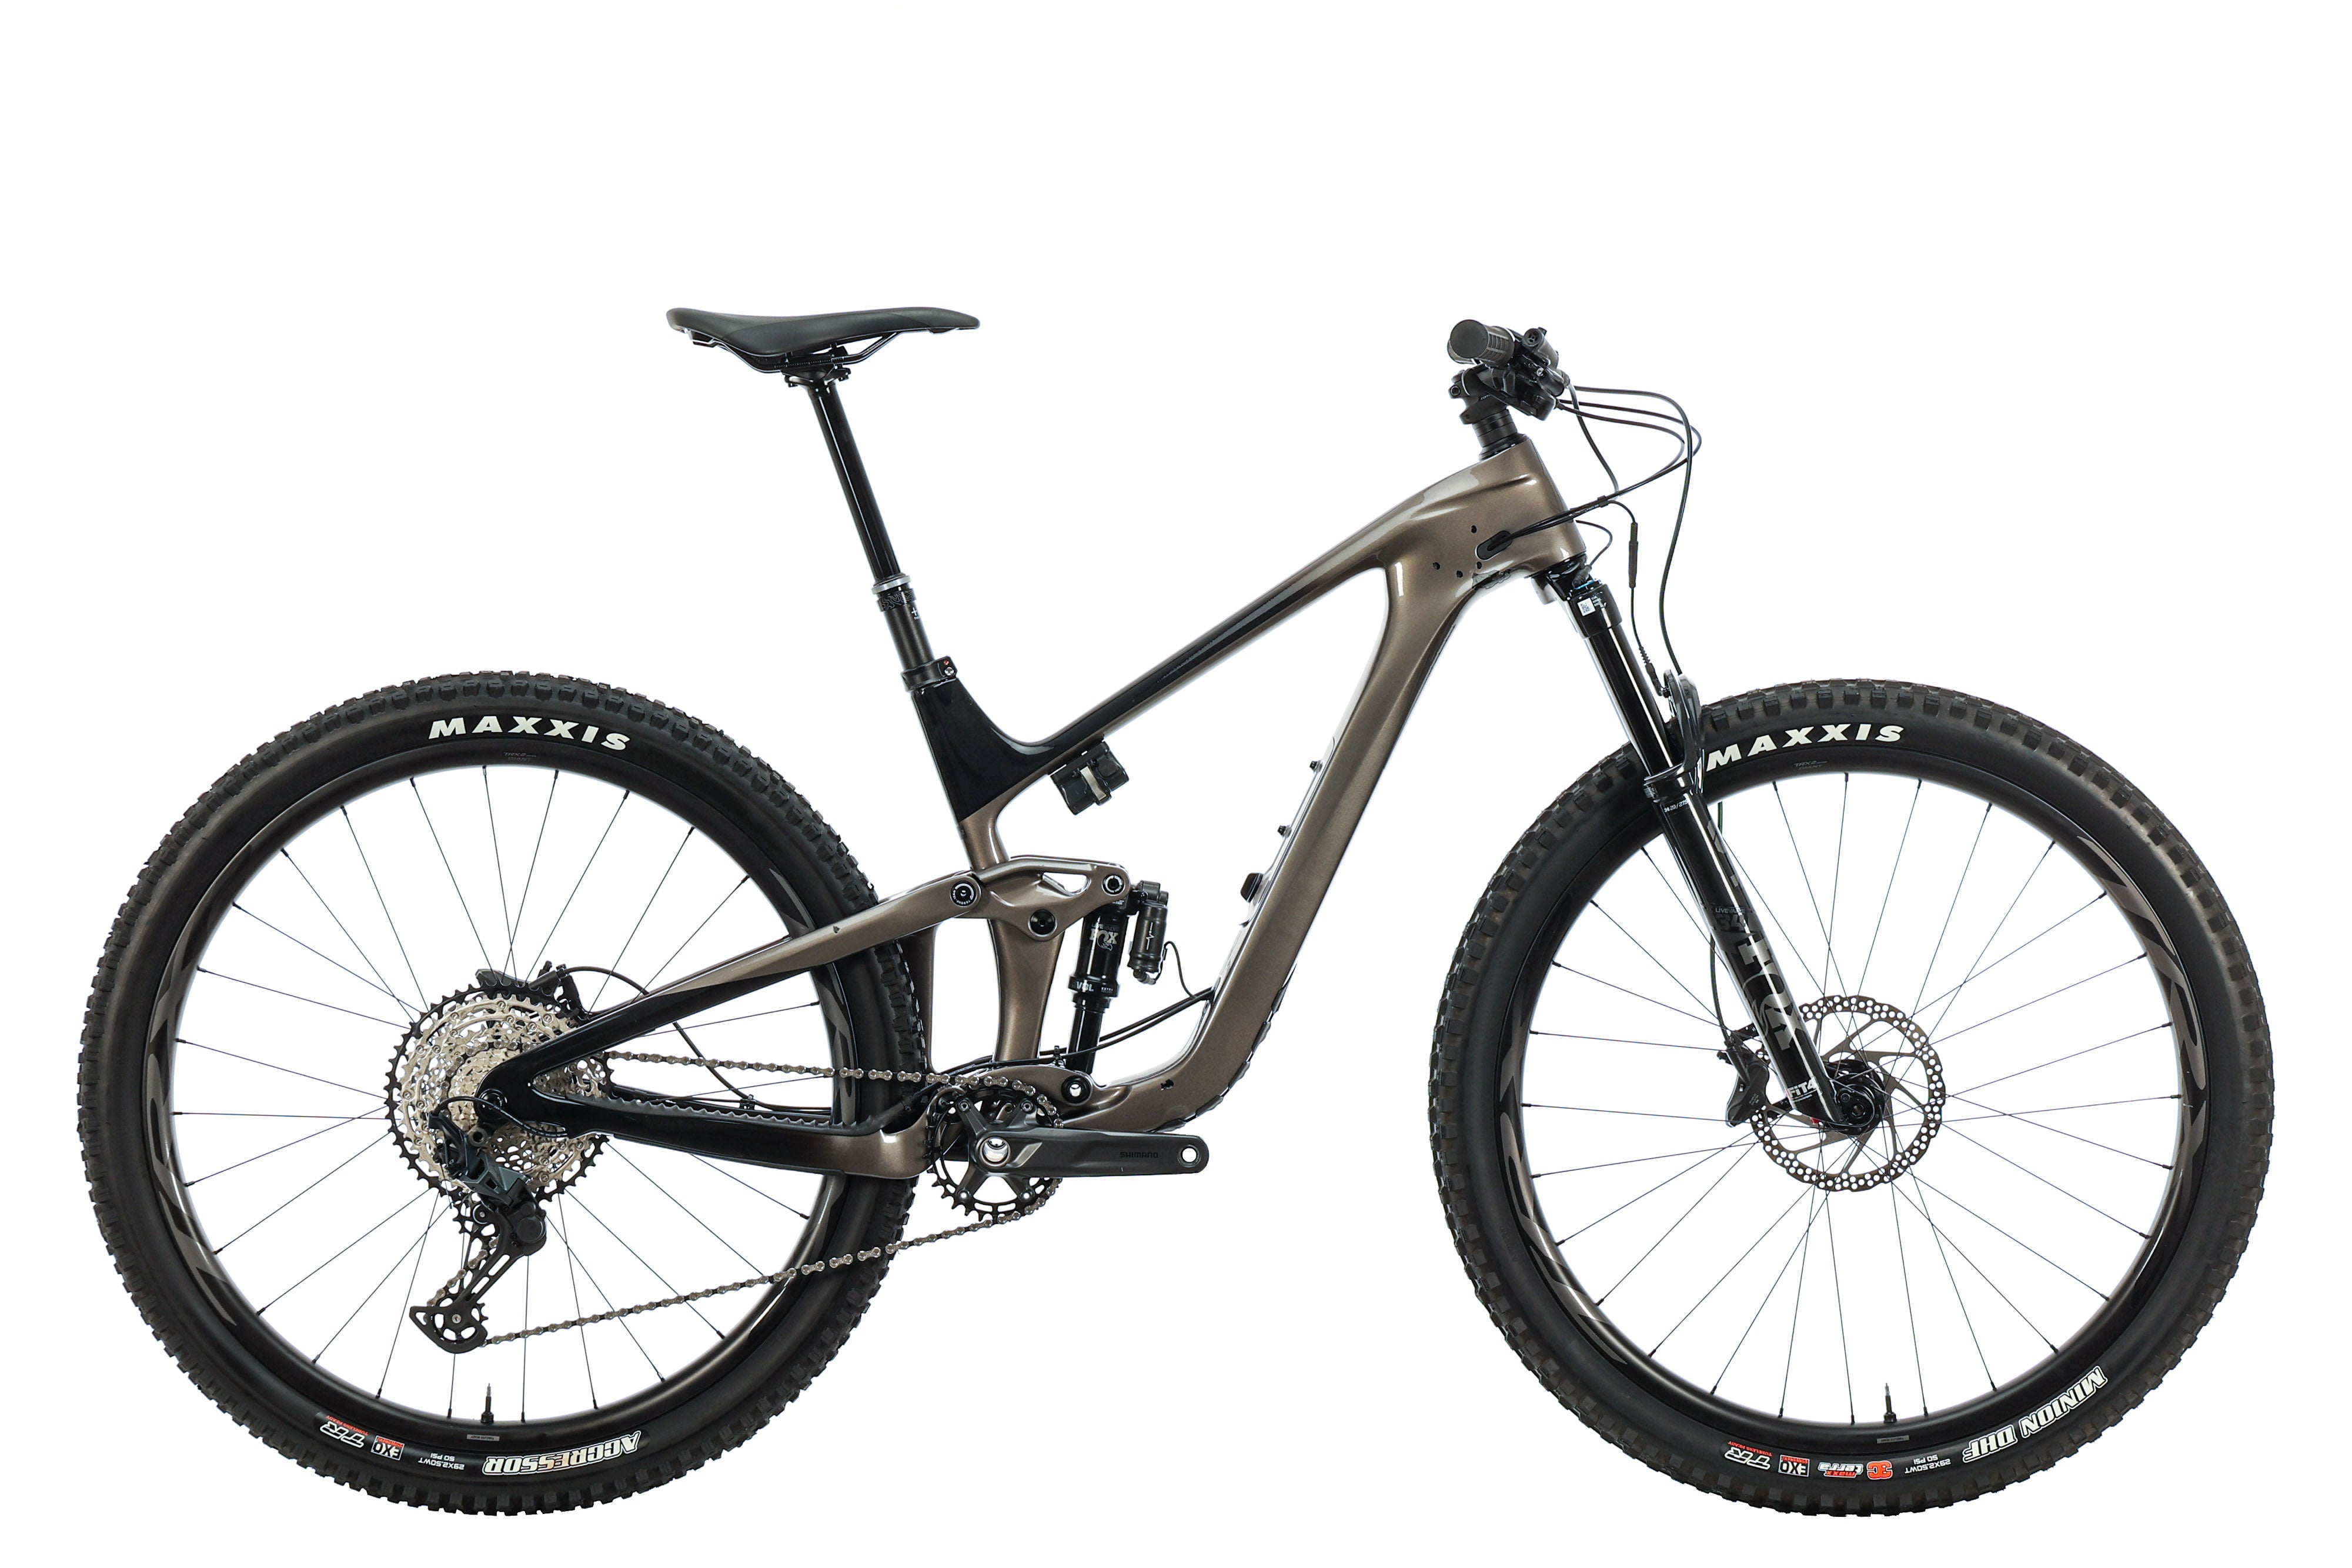 New and Used Giant Trance Bikes For Sale The Pros Closet